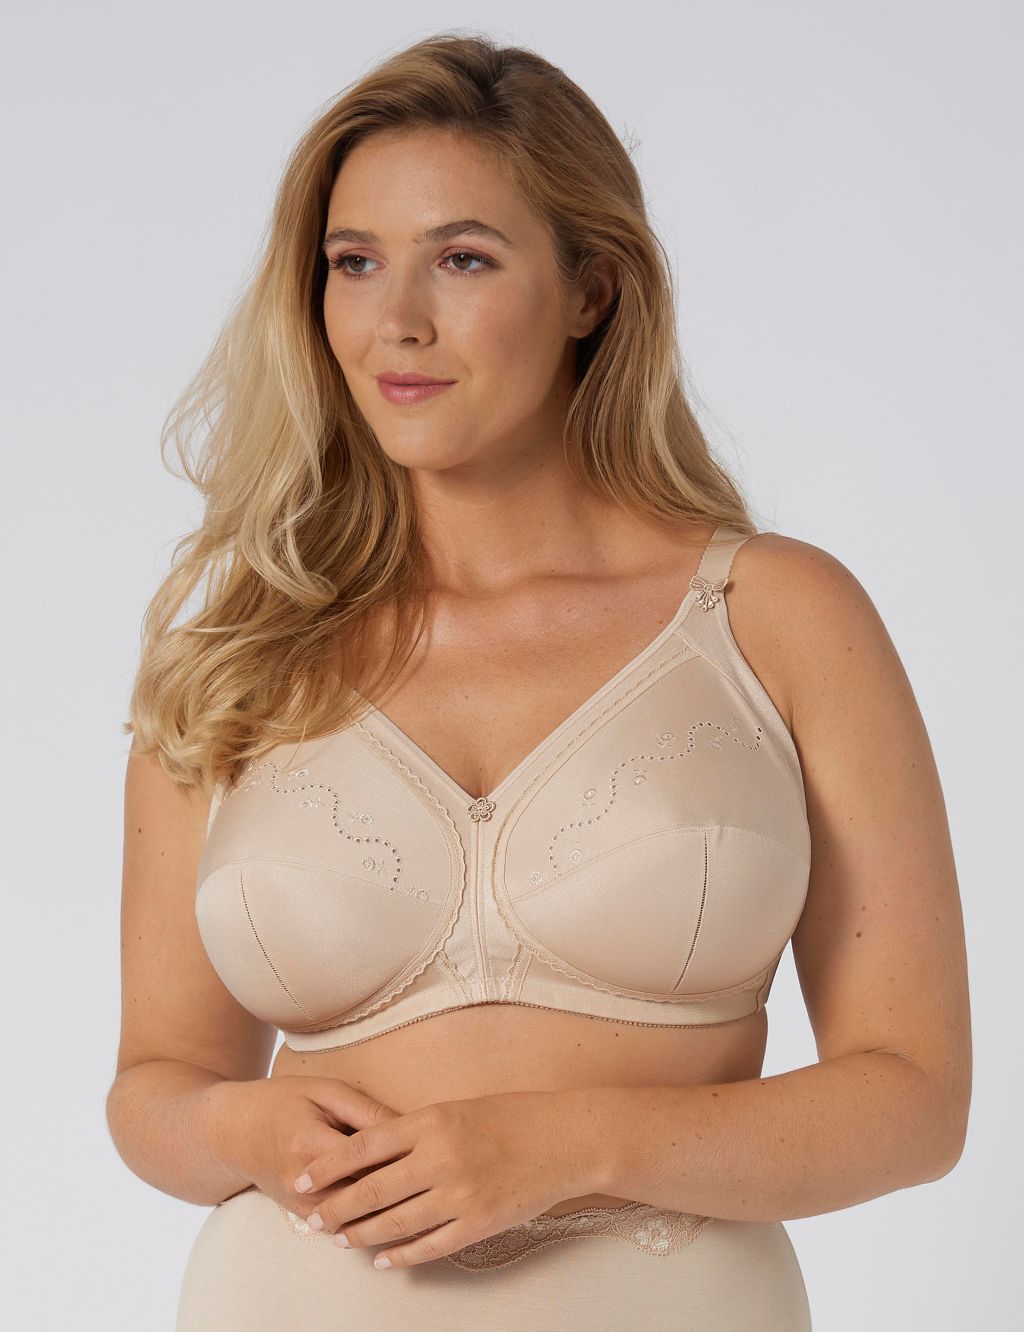 M&S Total Support Embroidered Full Cup Non Wired Bra 34-46 C to K